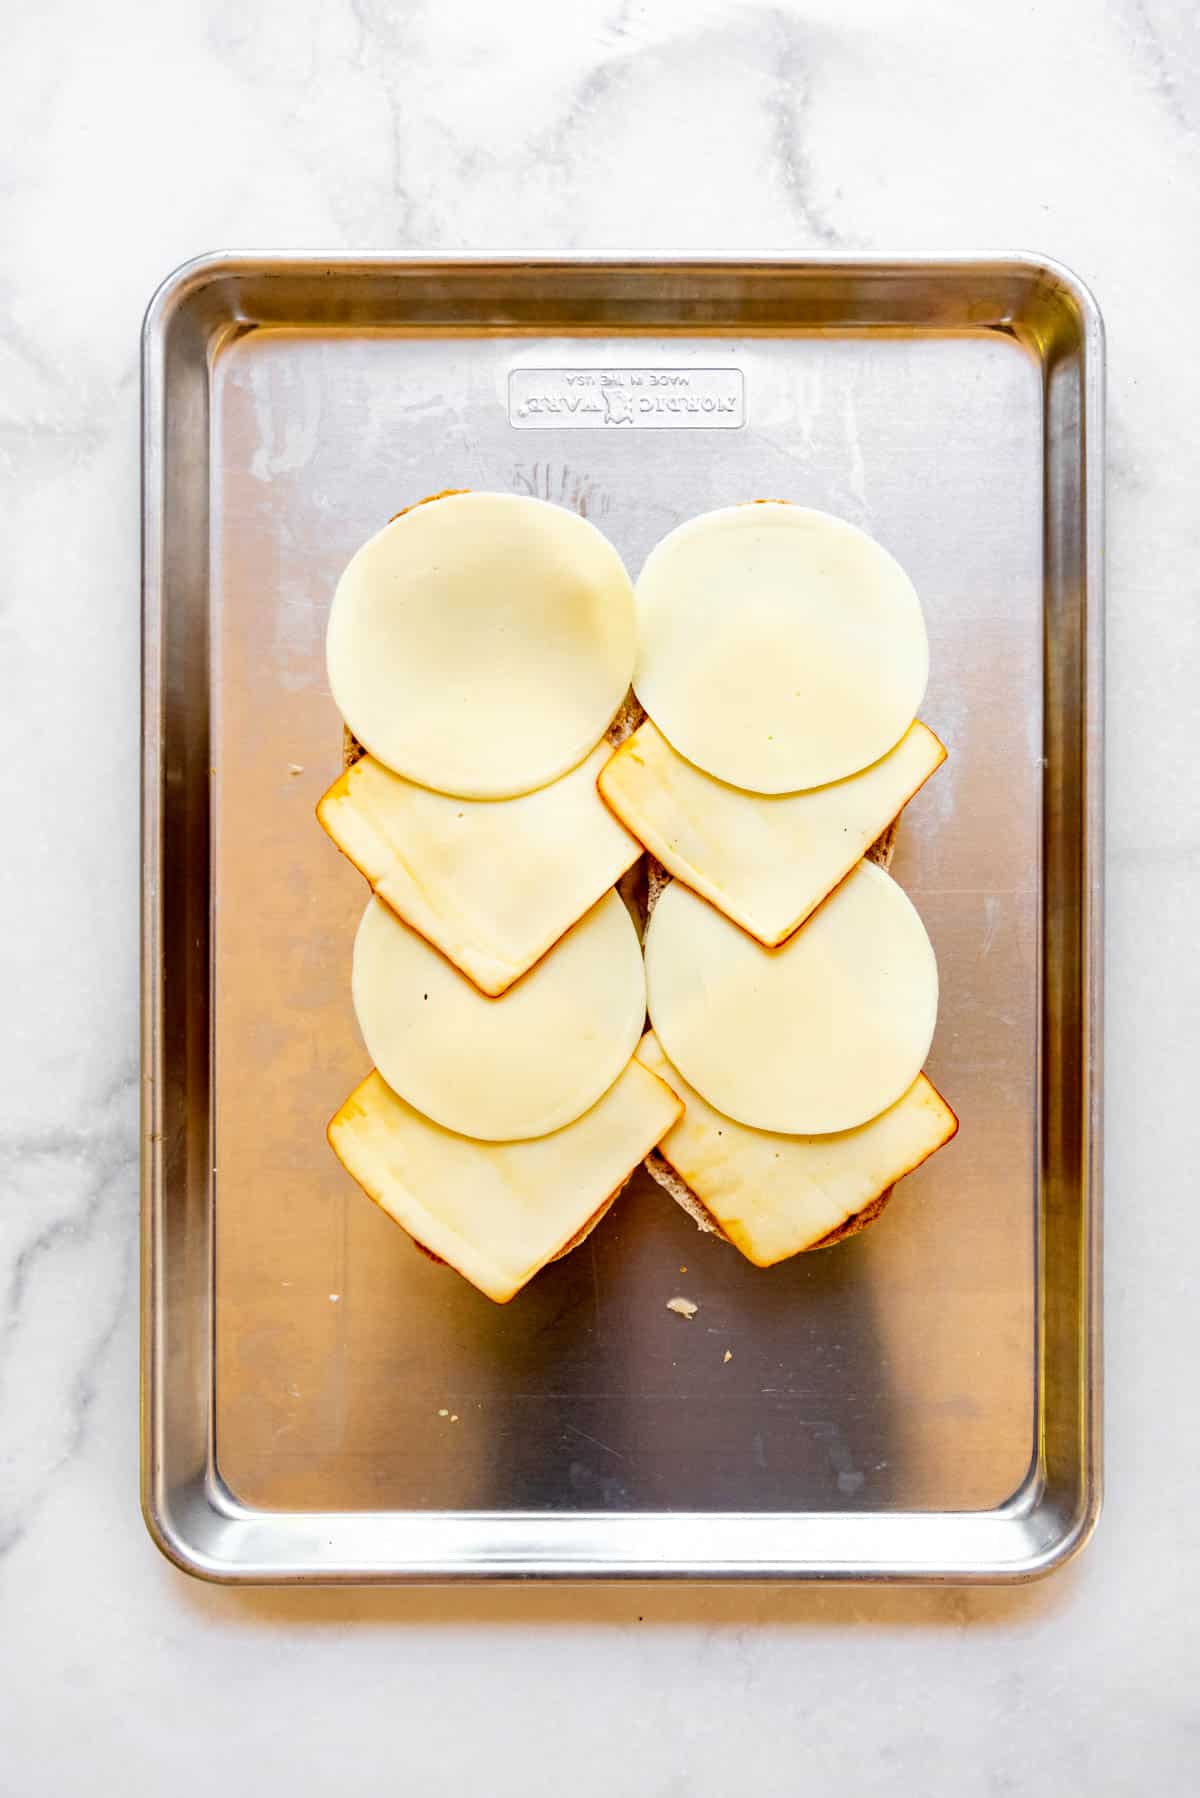 Slices of provolone and muenster cheese on a hoagie roll on a baking sheet.